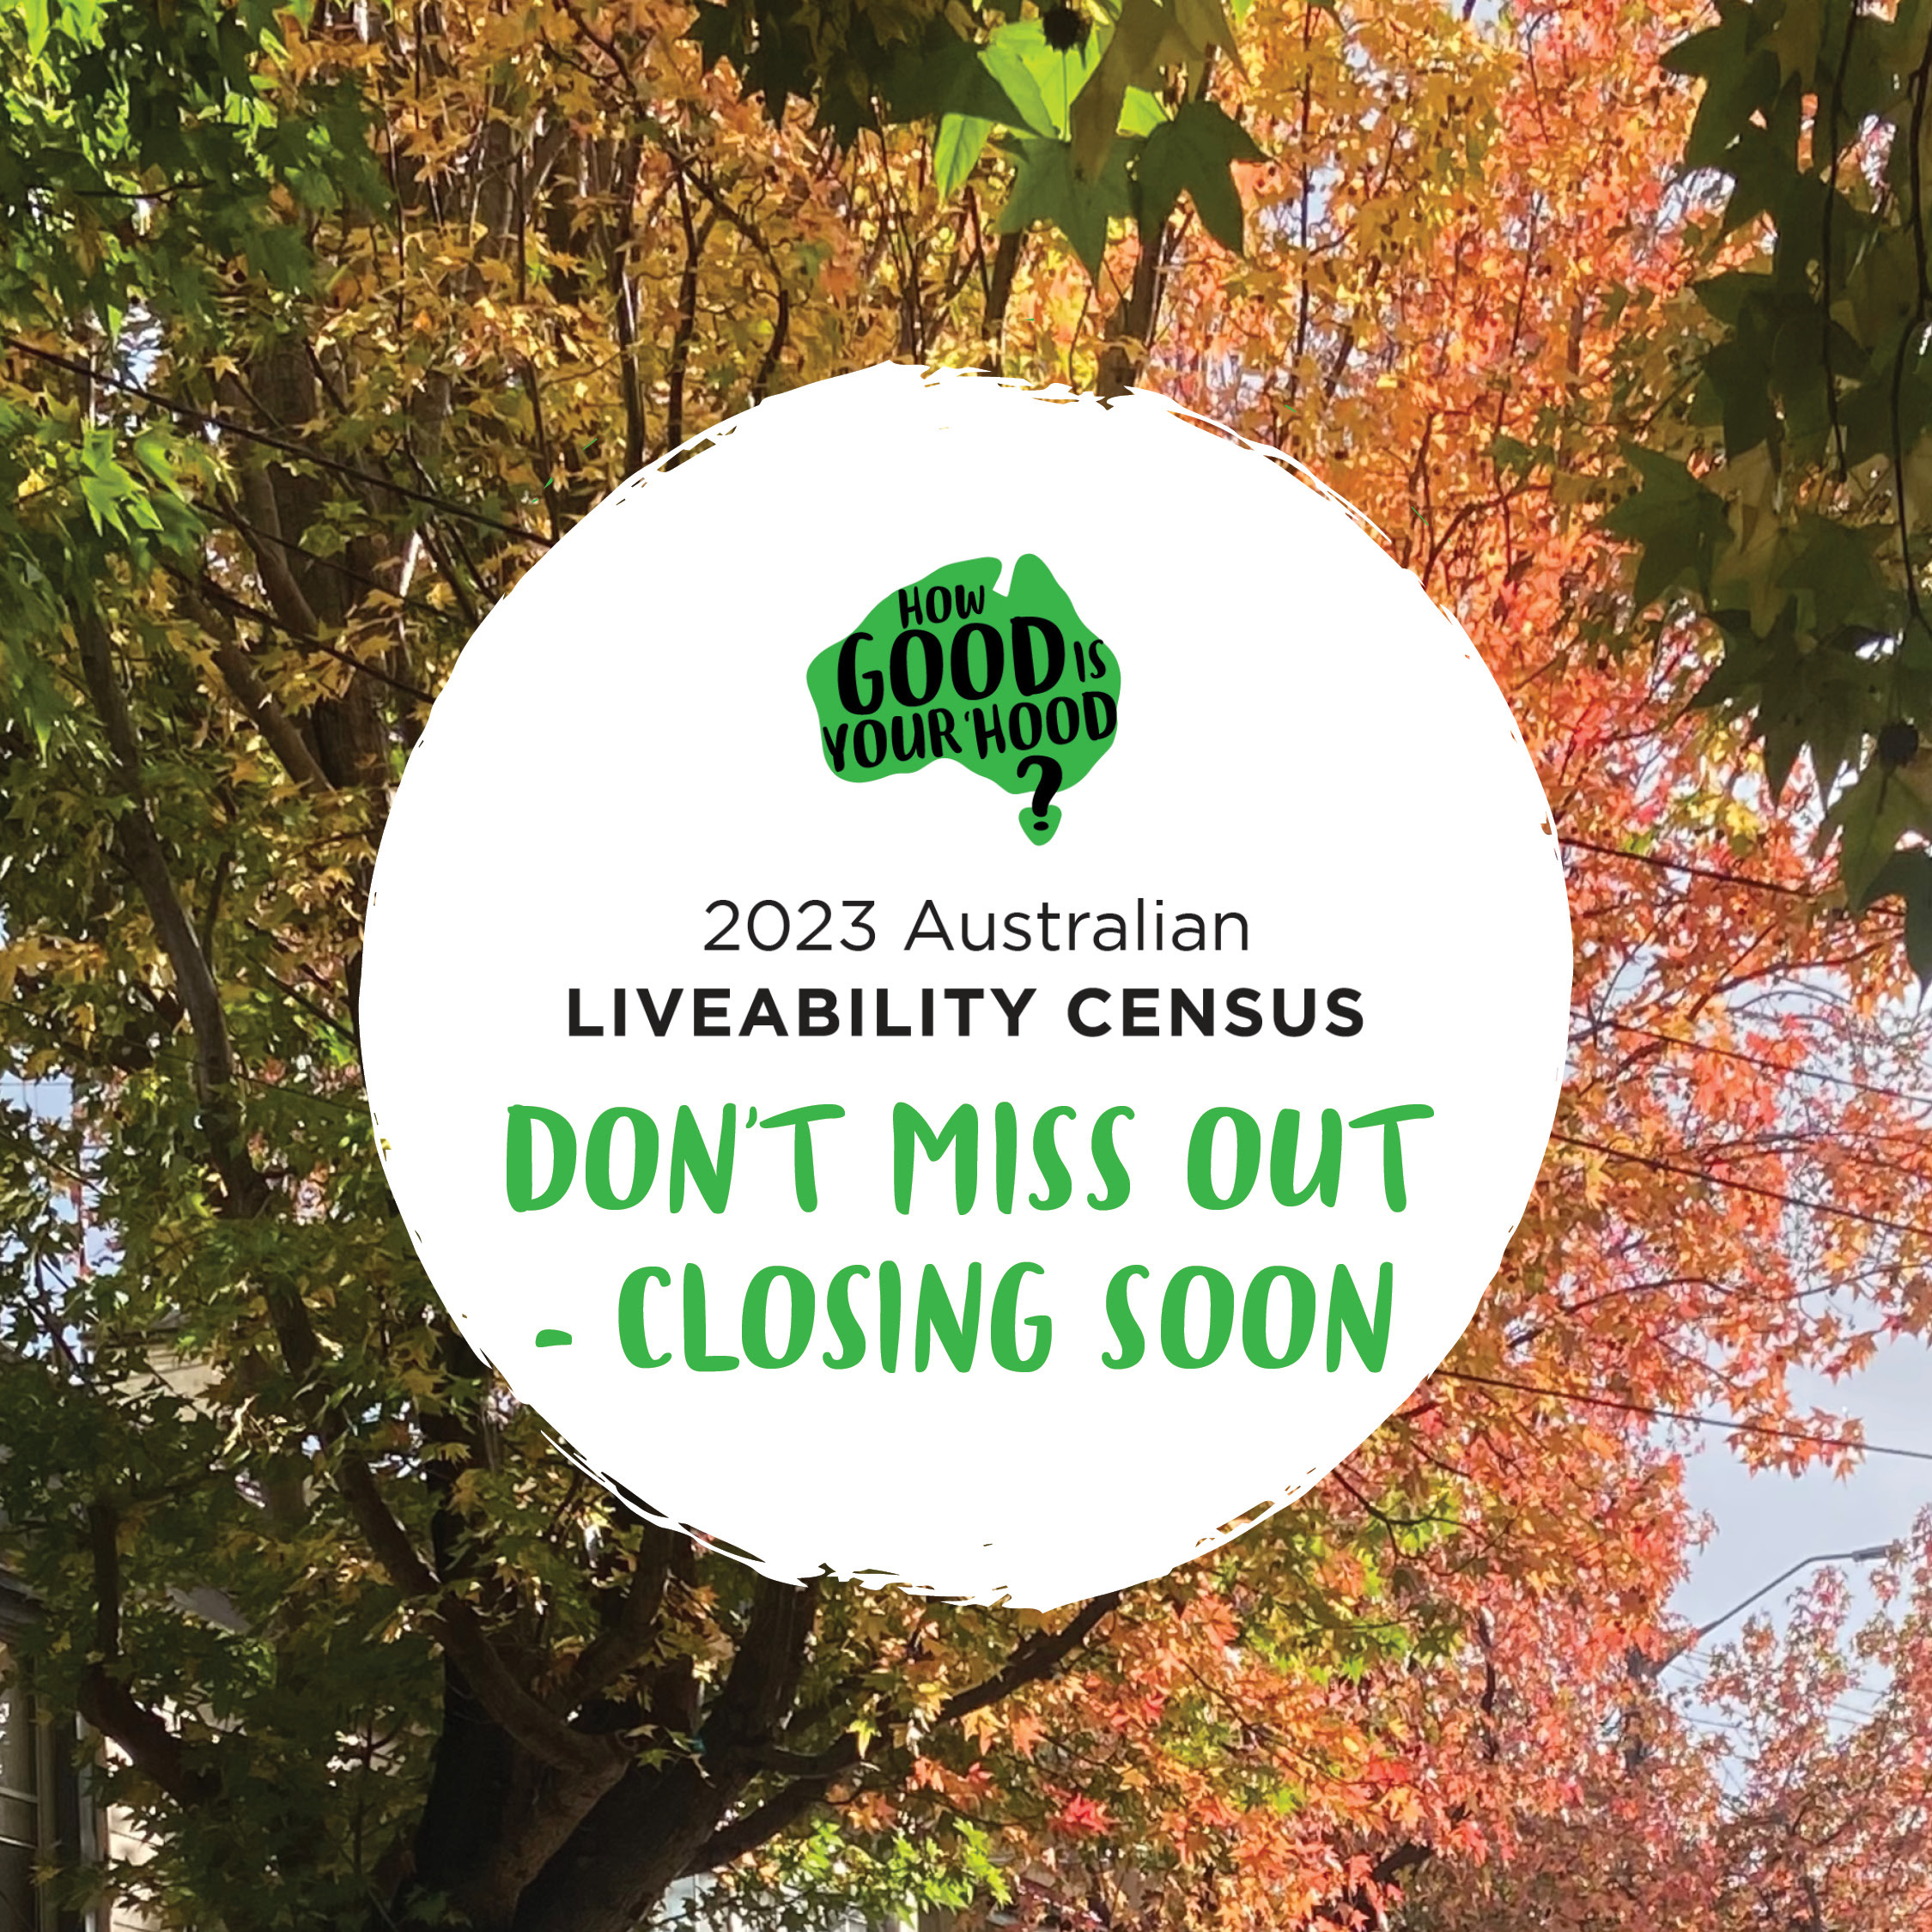 Australian Liveability Census closing soon - text written in a white circle framed by a photo of trees